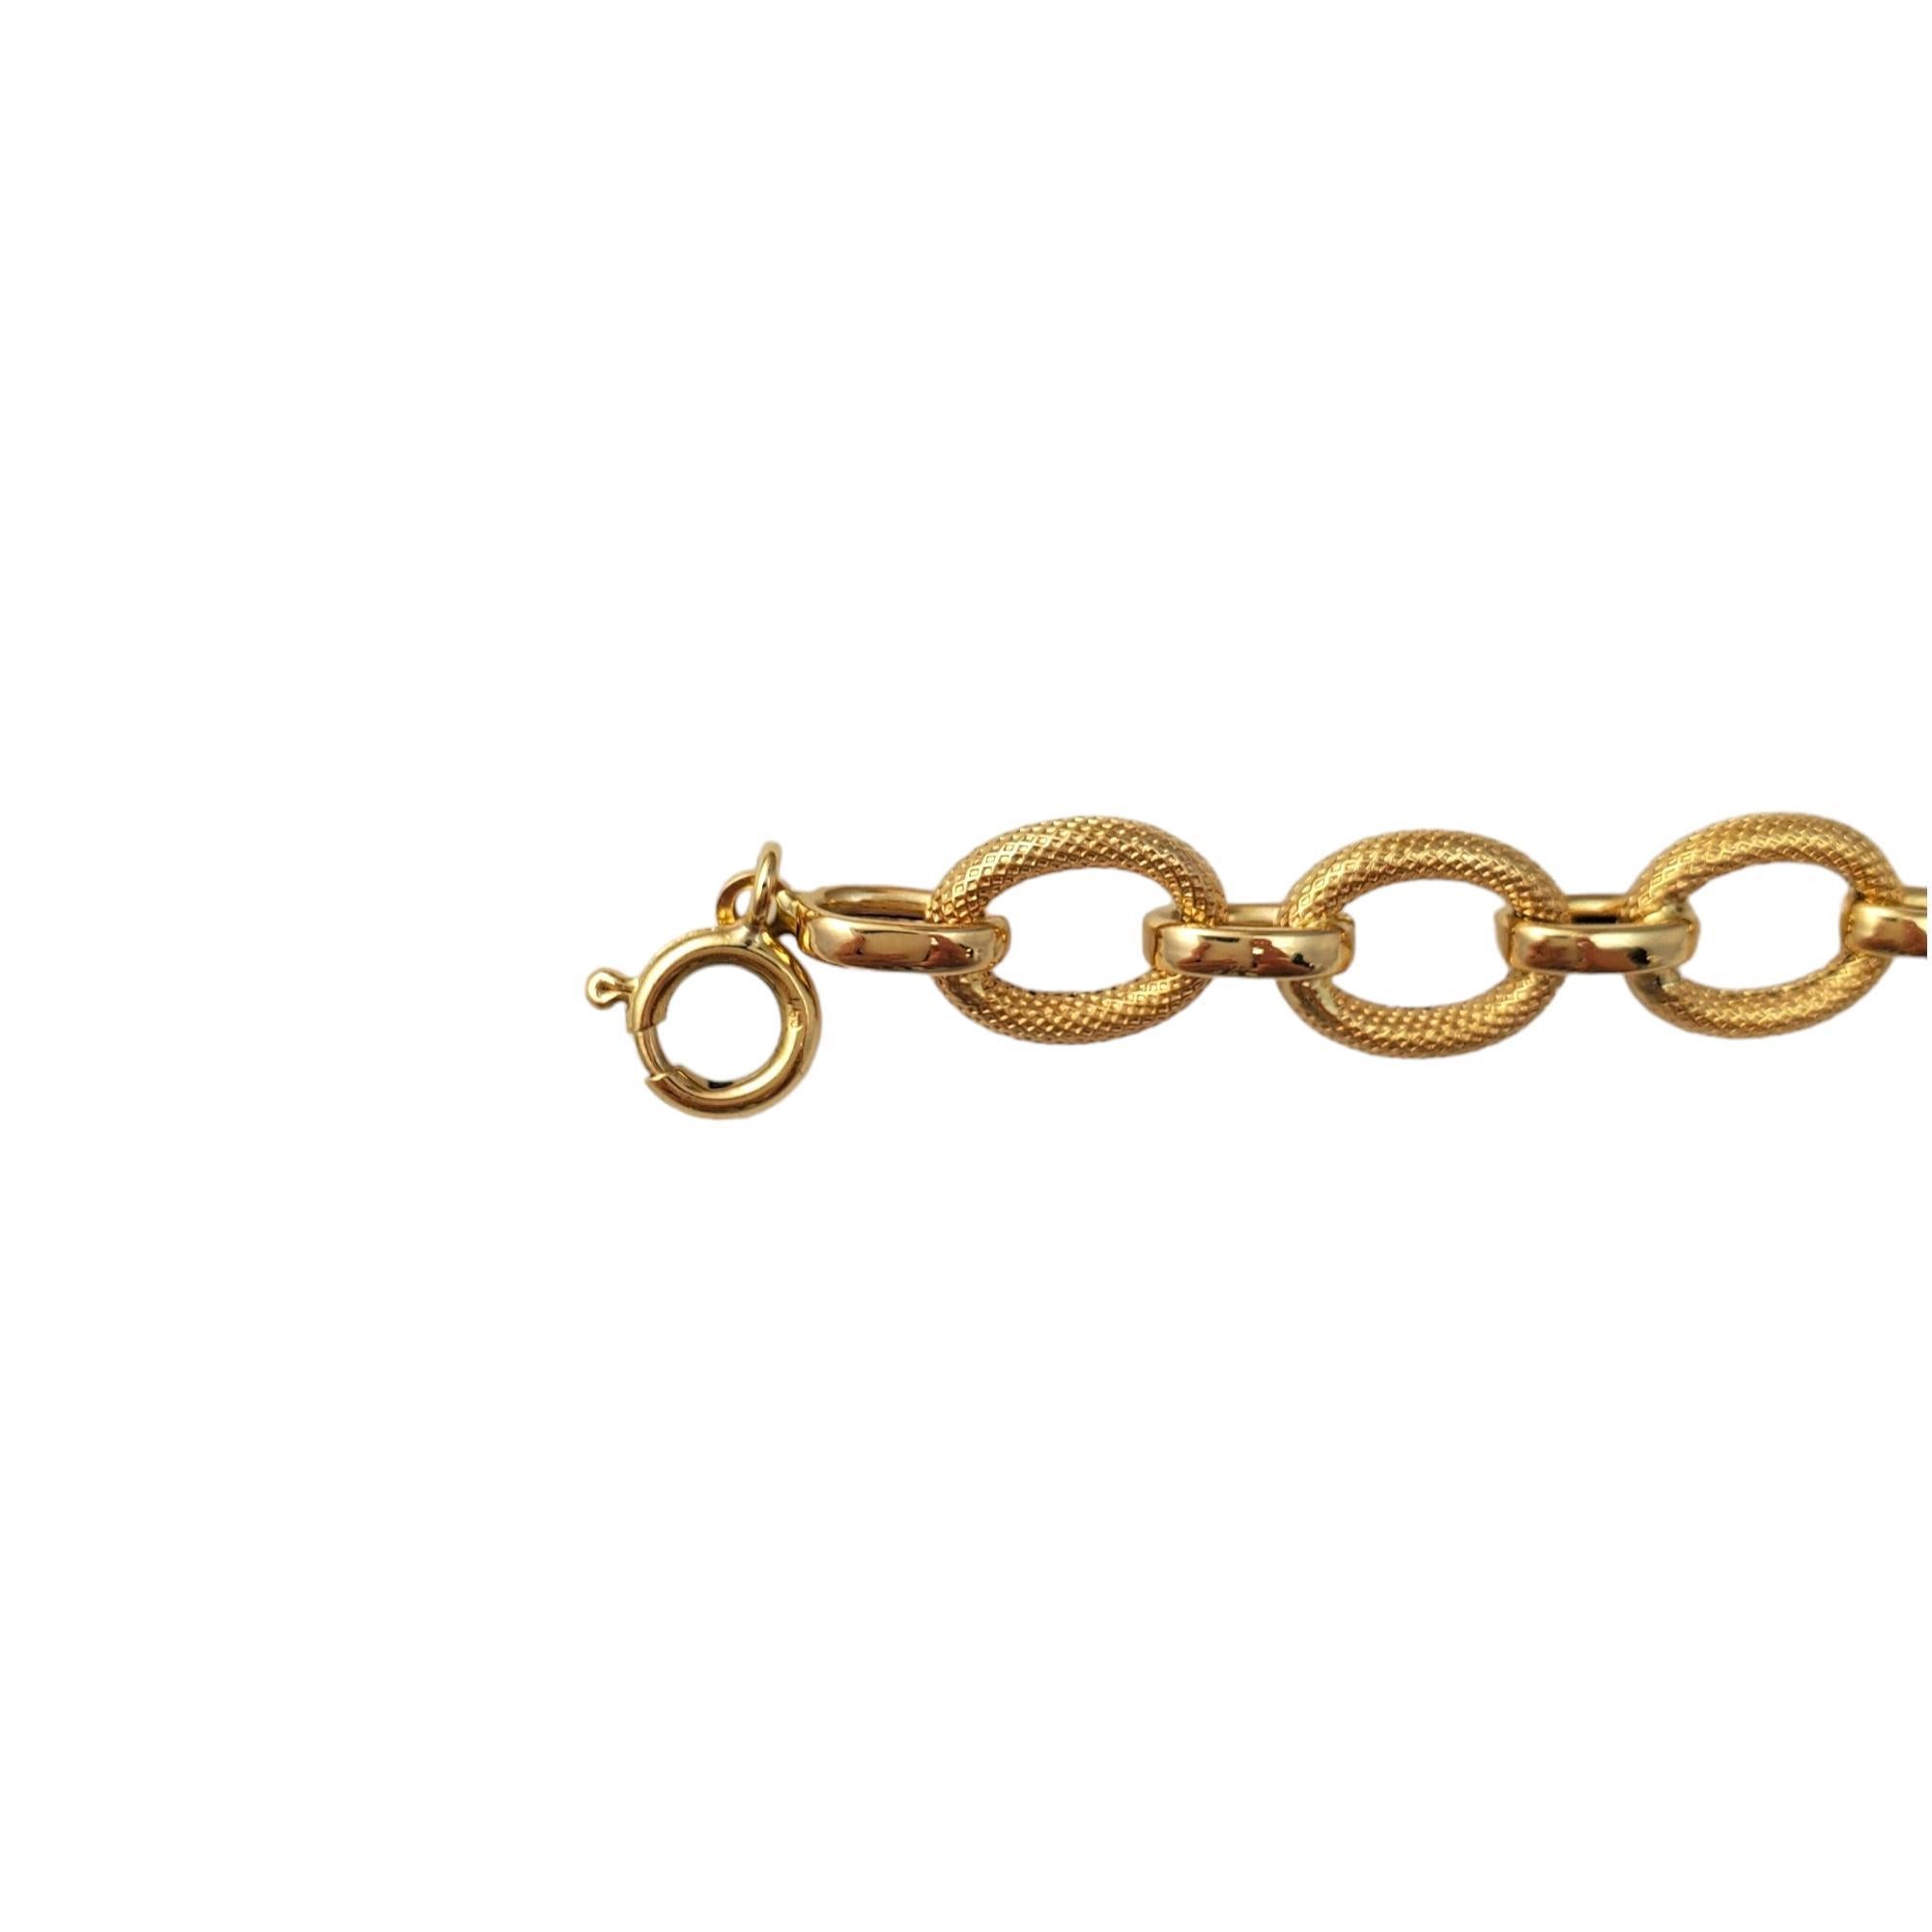 18K Yellow Gold Textured Link Chain Bracelet #16516 For Sale 1